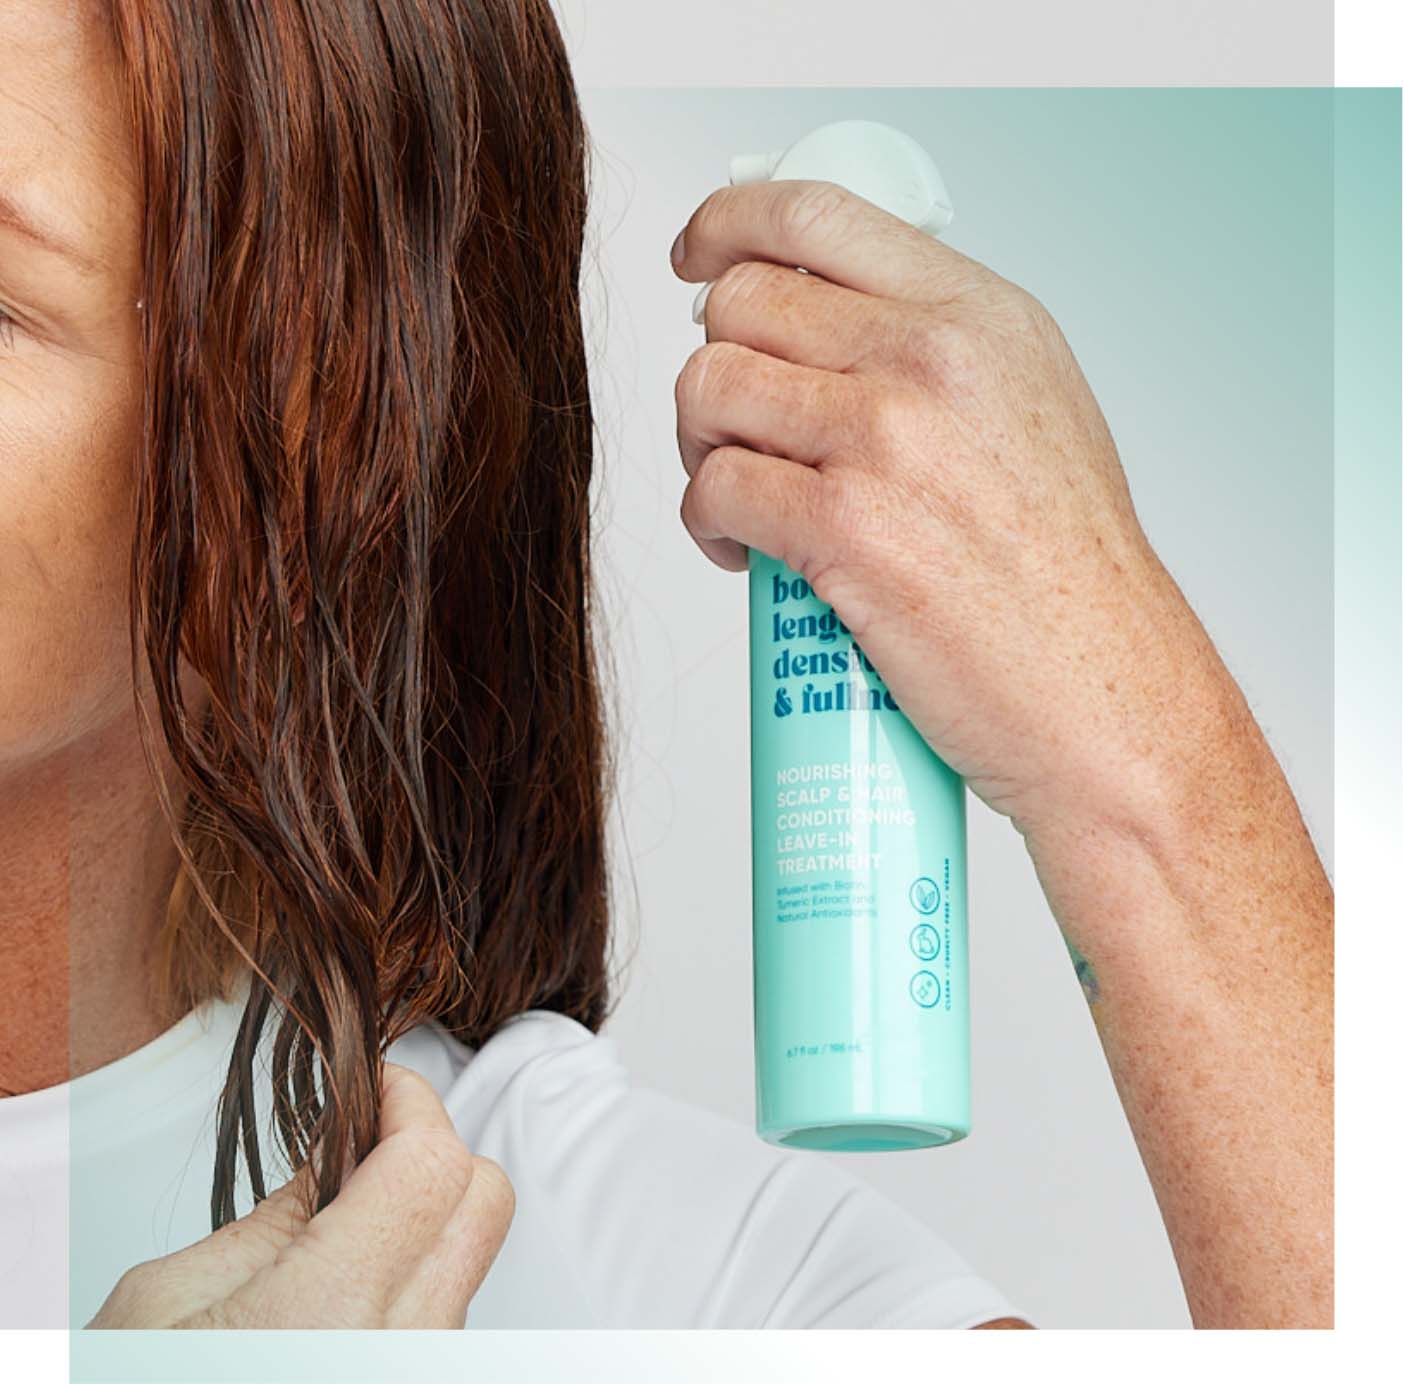 Woman spraying conditioning leave-in treatment on her wet hair